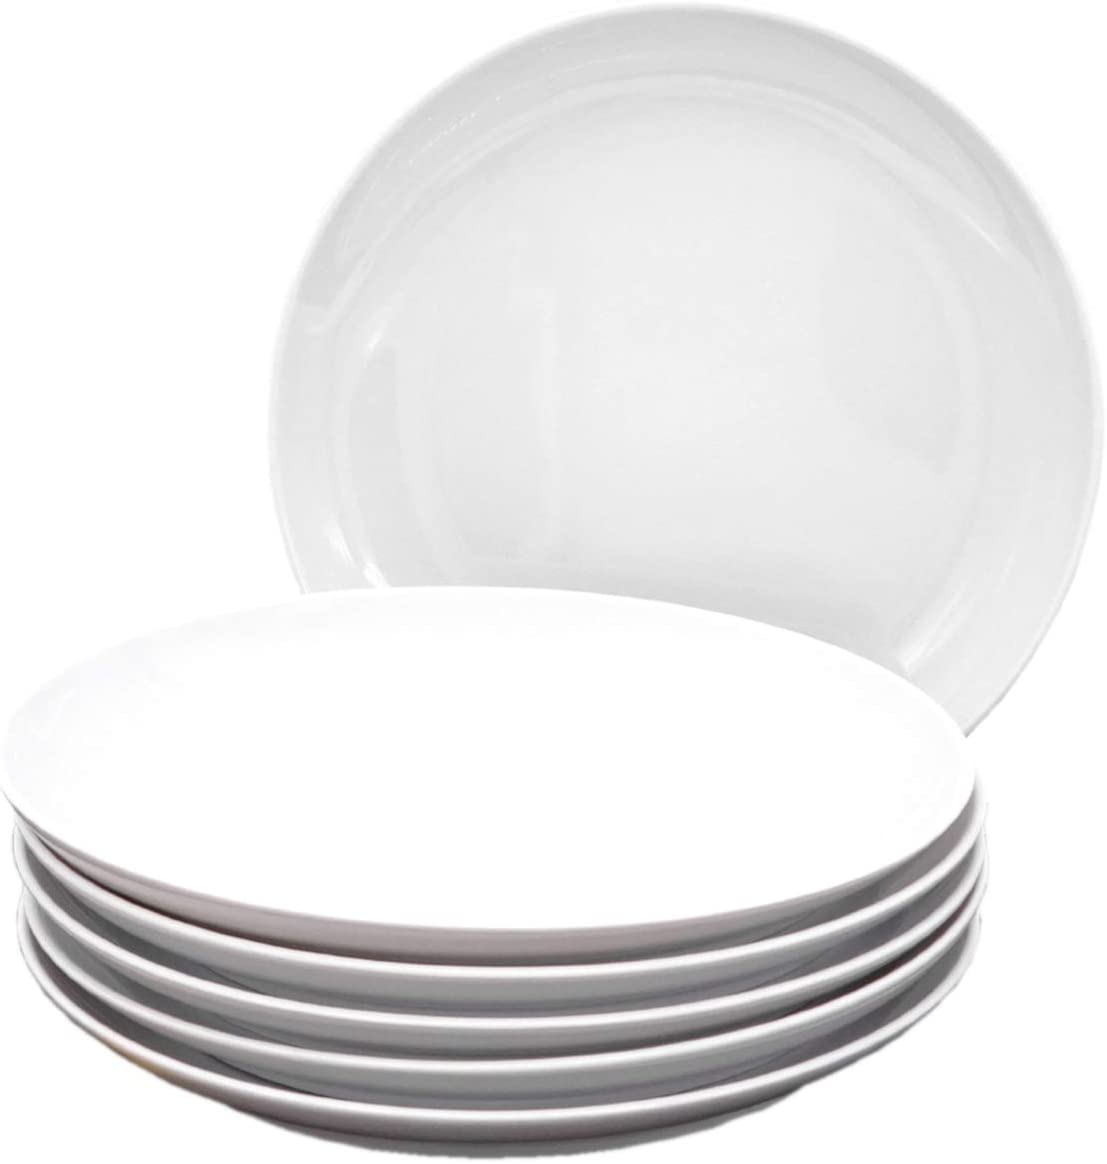 Kahla Five Senses 39F190A90039C Porcelain Plate Set of 6 Dessert Plates for 6 People 22 cm Round White without Decor Small Snack Plates